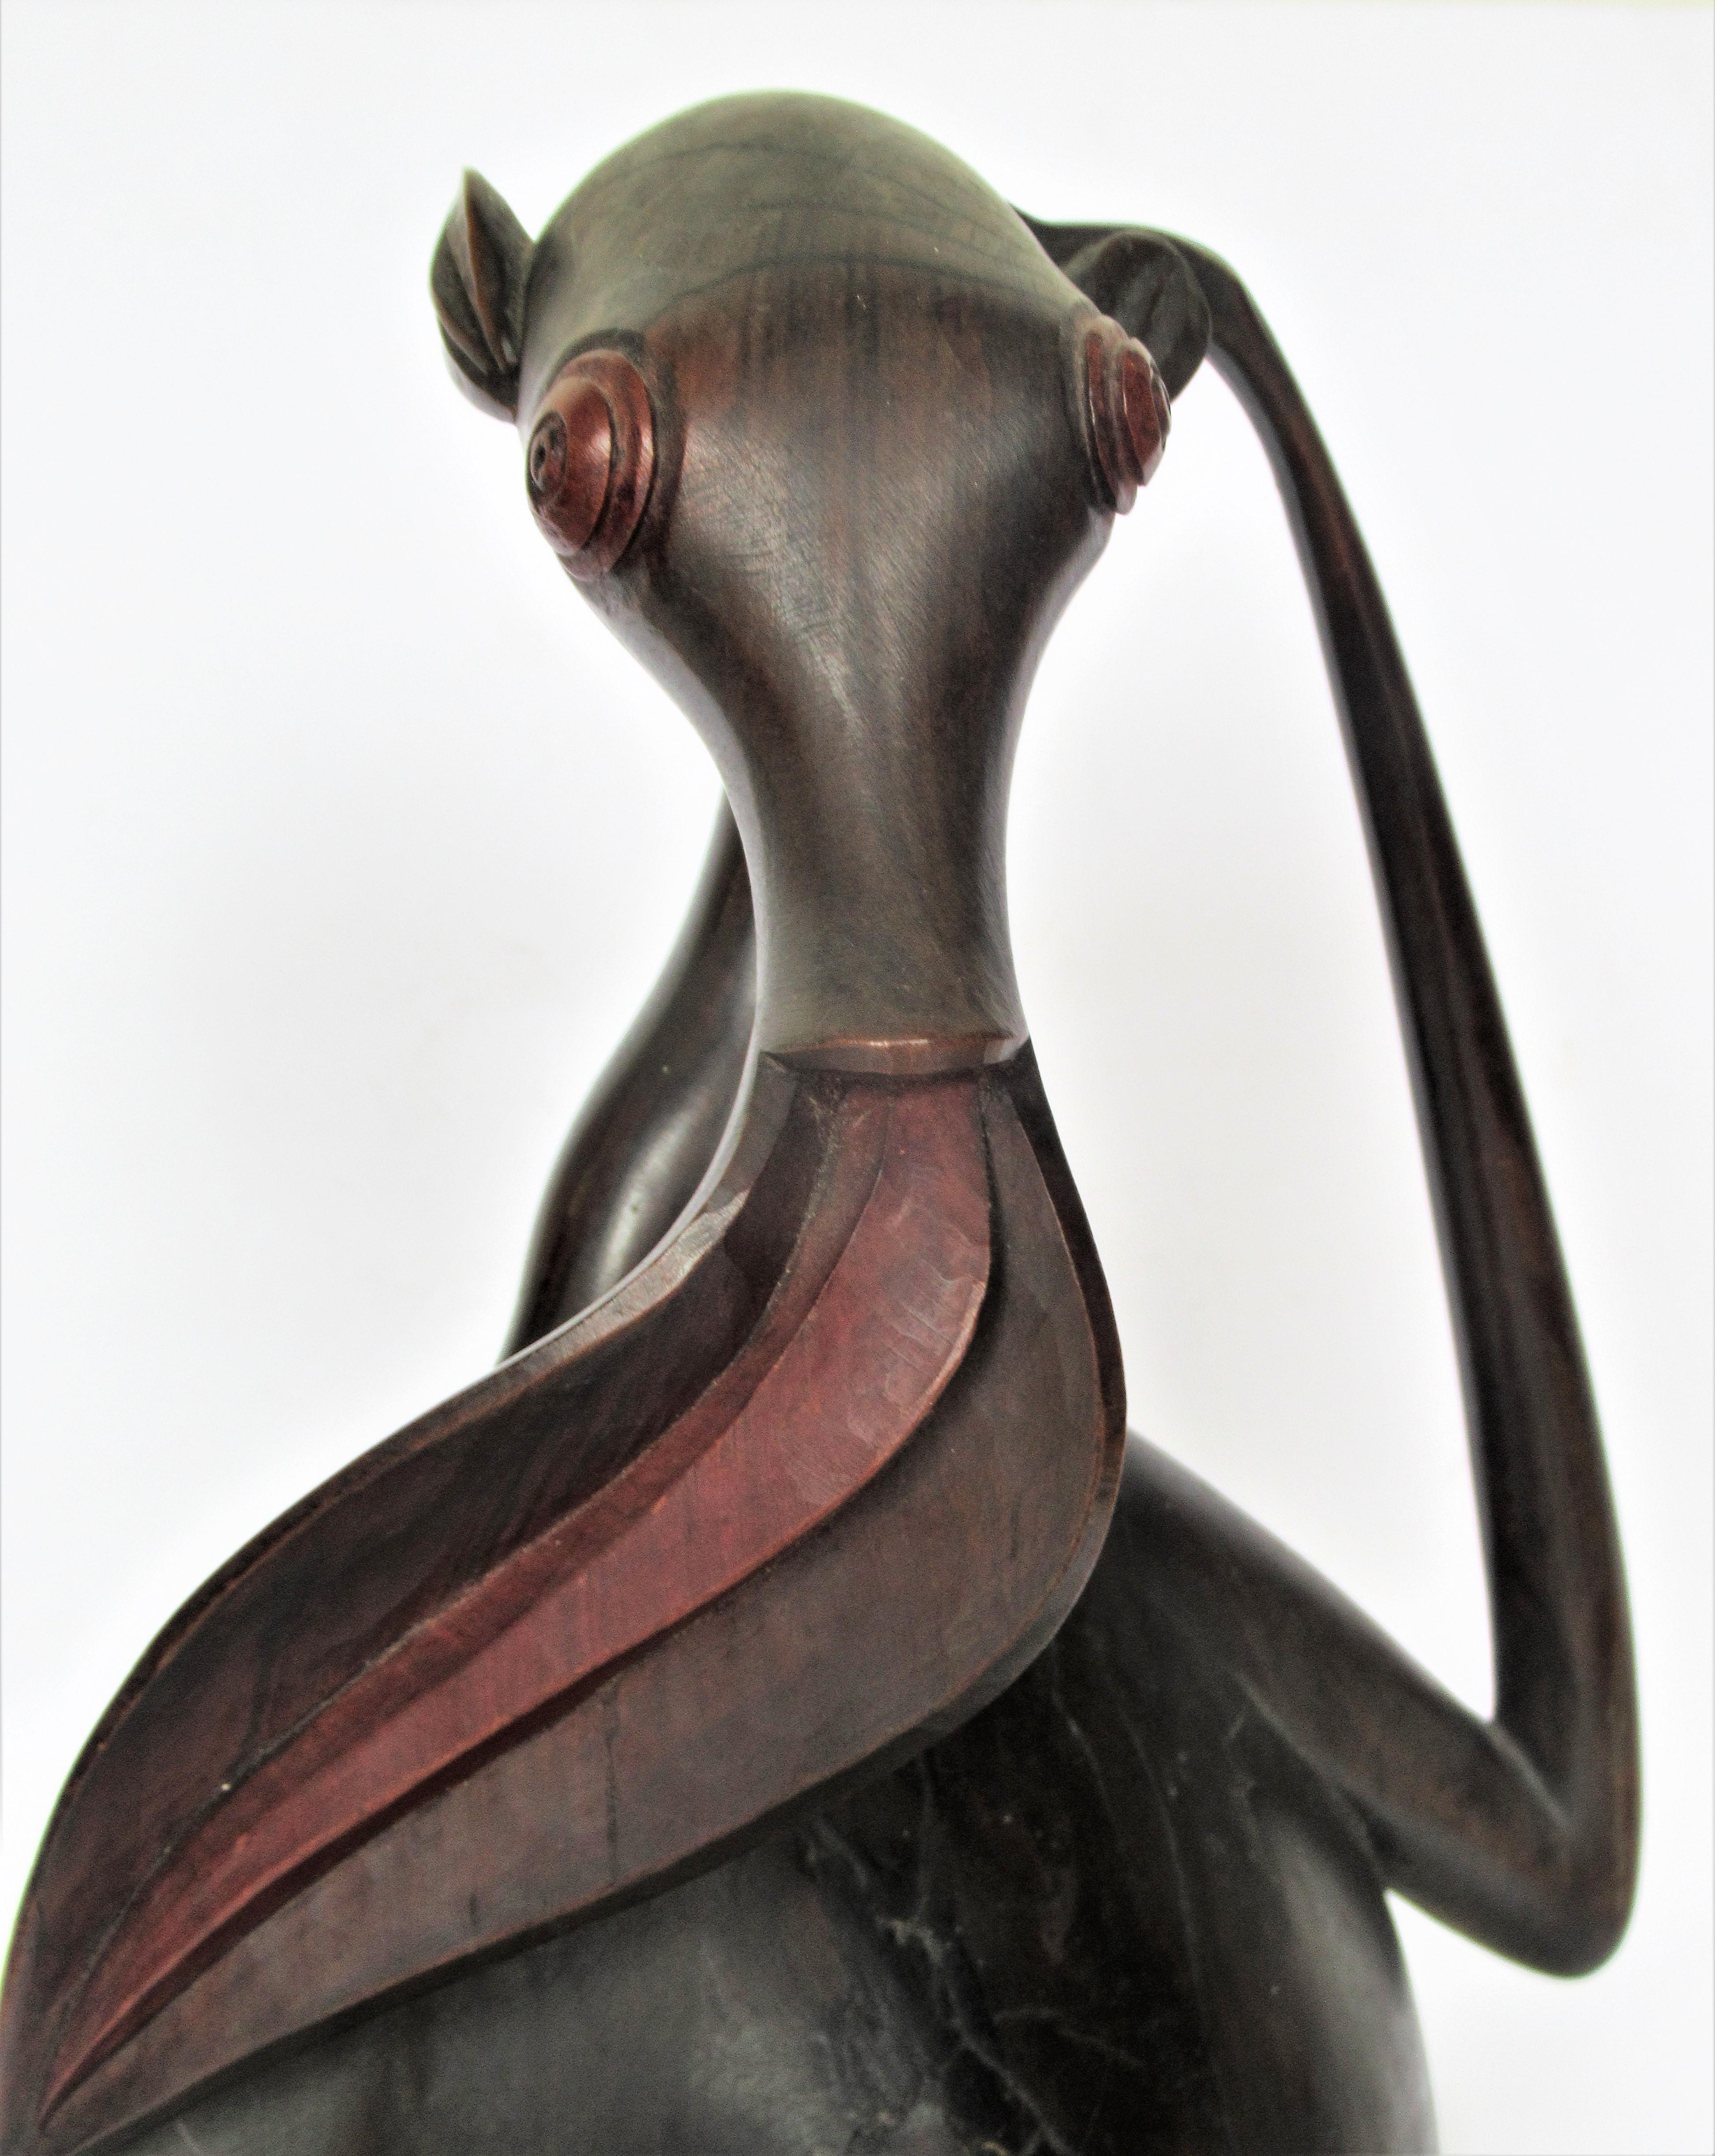 Makonde modernist sculpture of an Aardvark / Antbear in exceptional finely carved blackwood and original red stained features w/ overall beautifully aged old surface color patina. Tanzania / first half of the 20th century. A museum quality example